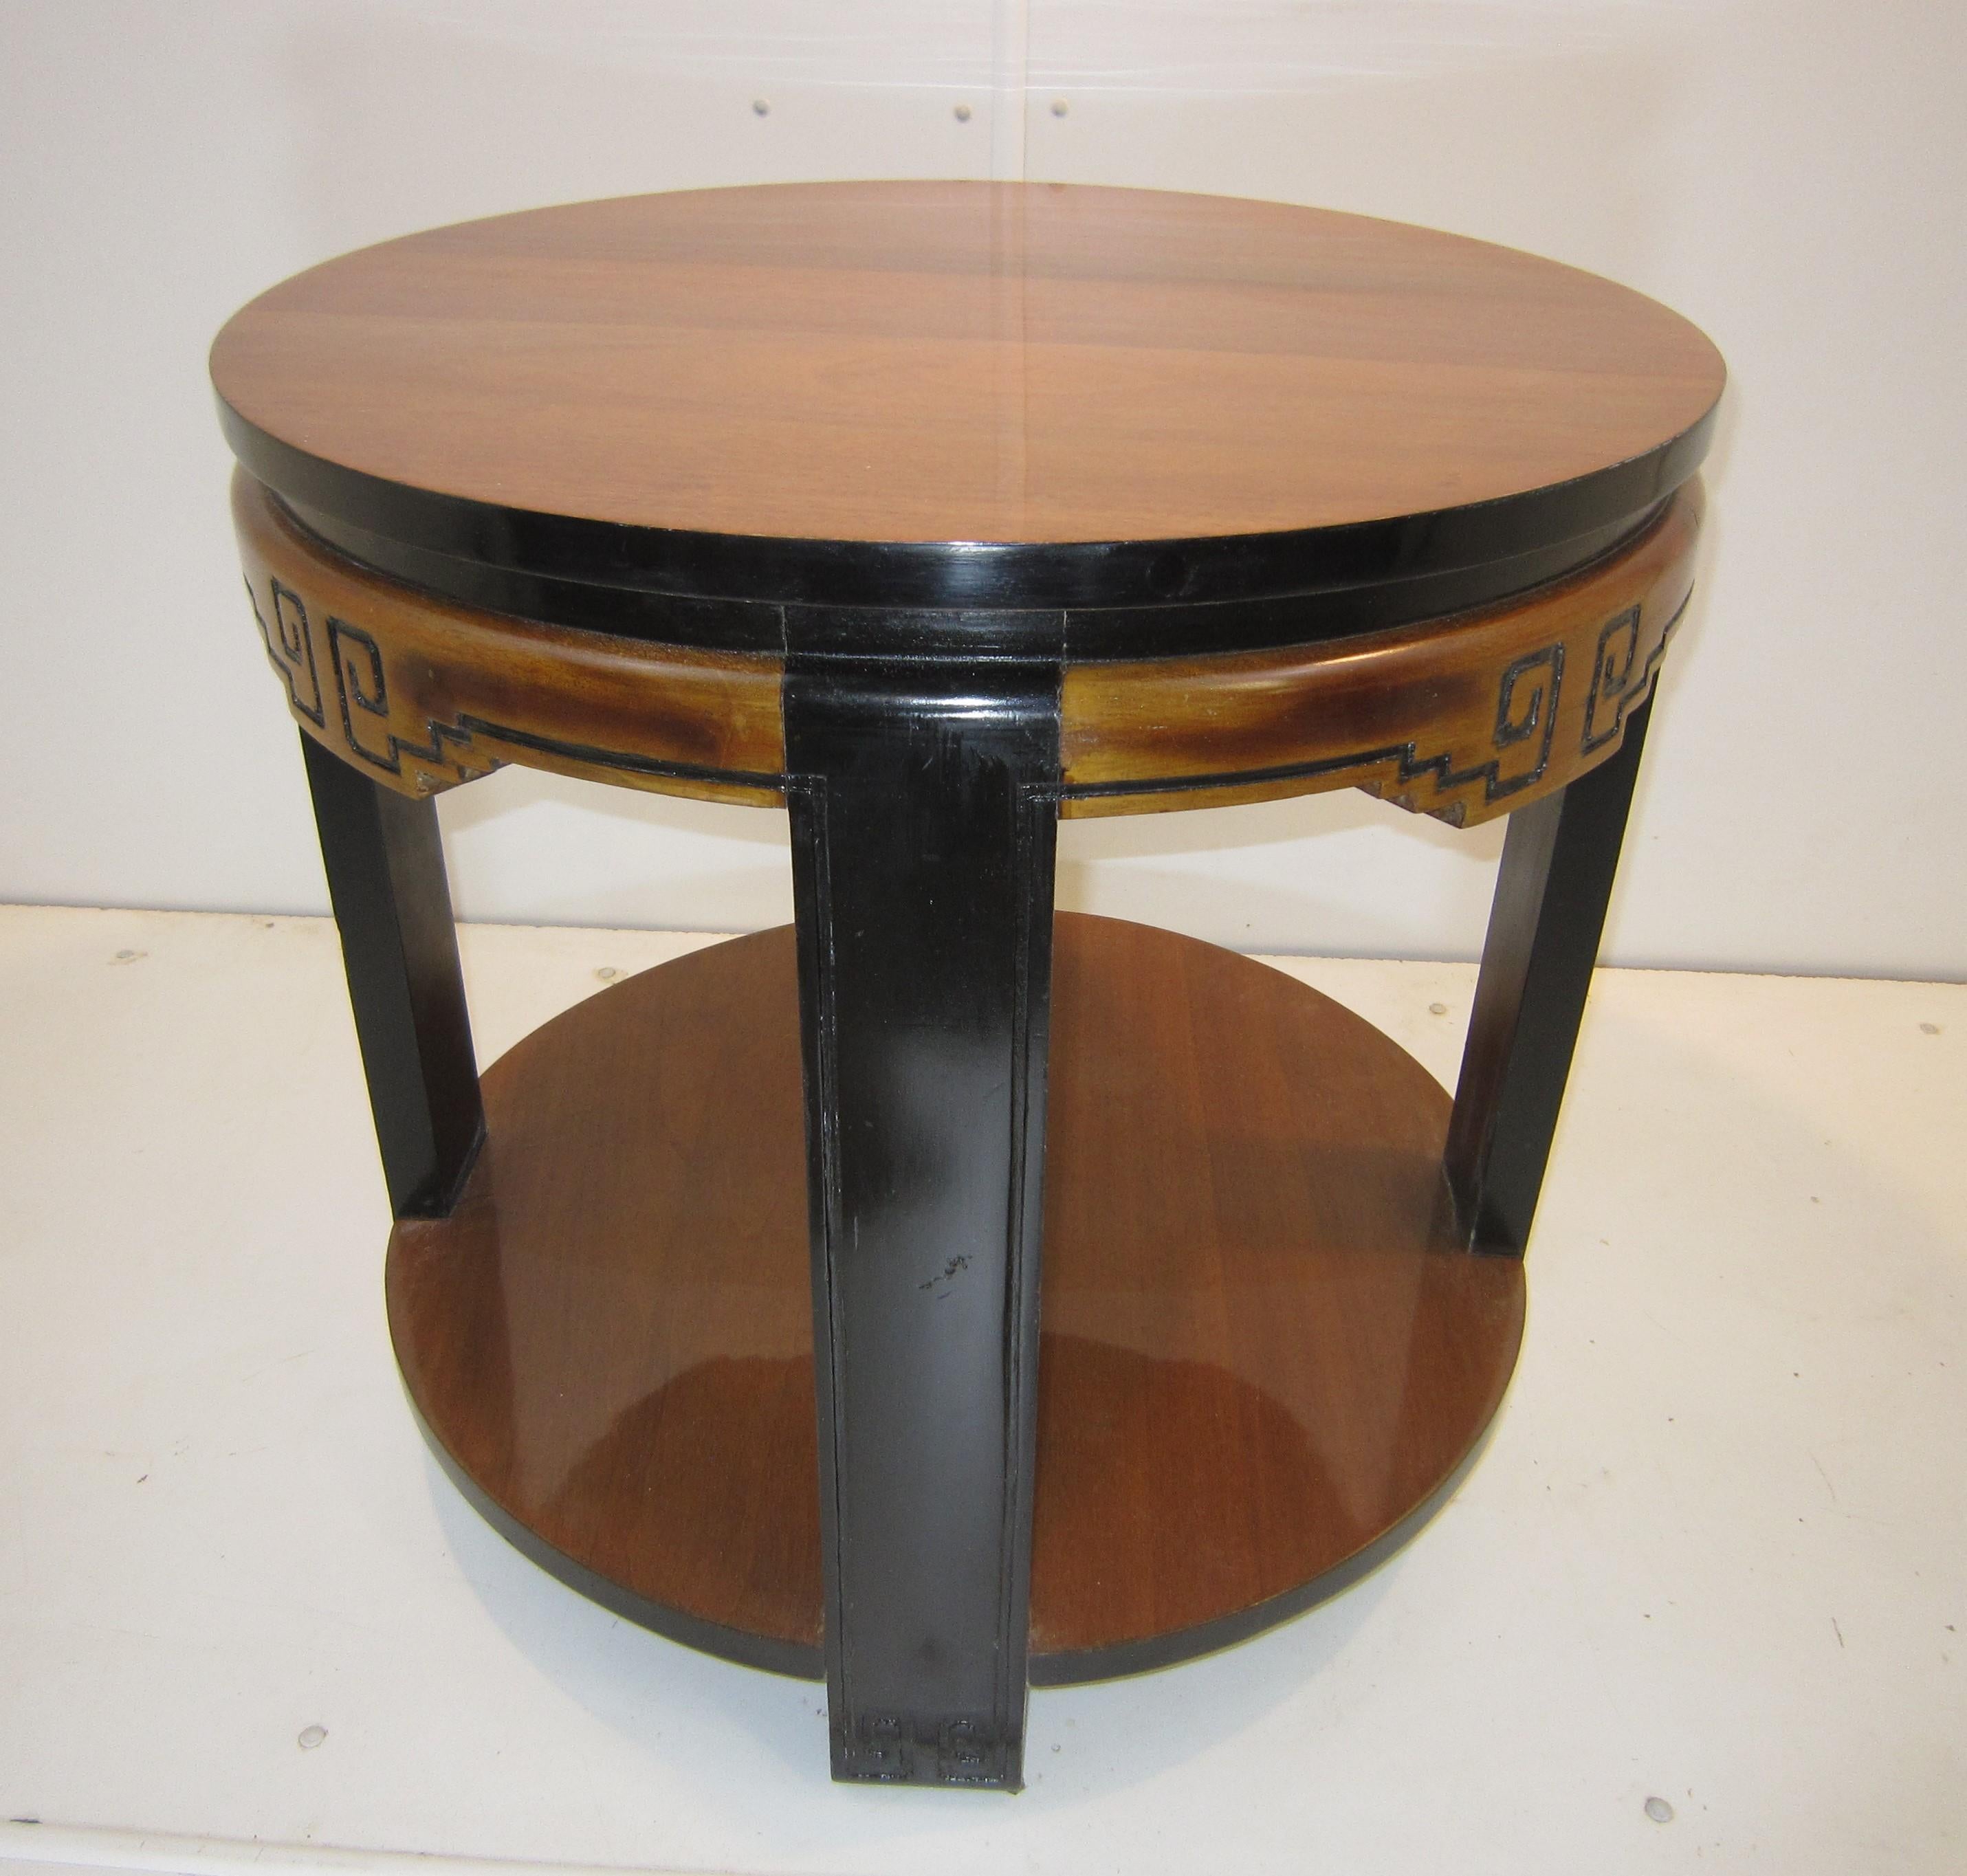 Fine French Art Deco circular table of chinoiserie design, highly sculptural and two tone in walnut with ebonized accents.
The circular top surrounded by a bull nose hand carved molding featuring a stylized Greek key design.
The whole mounted on